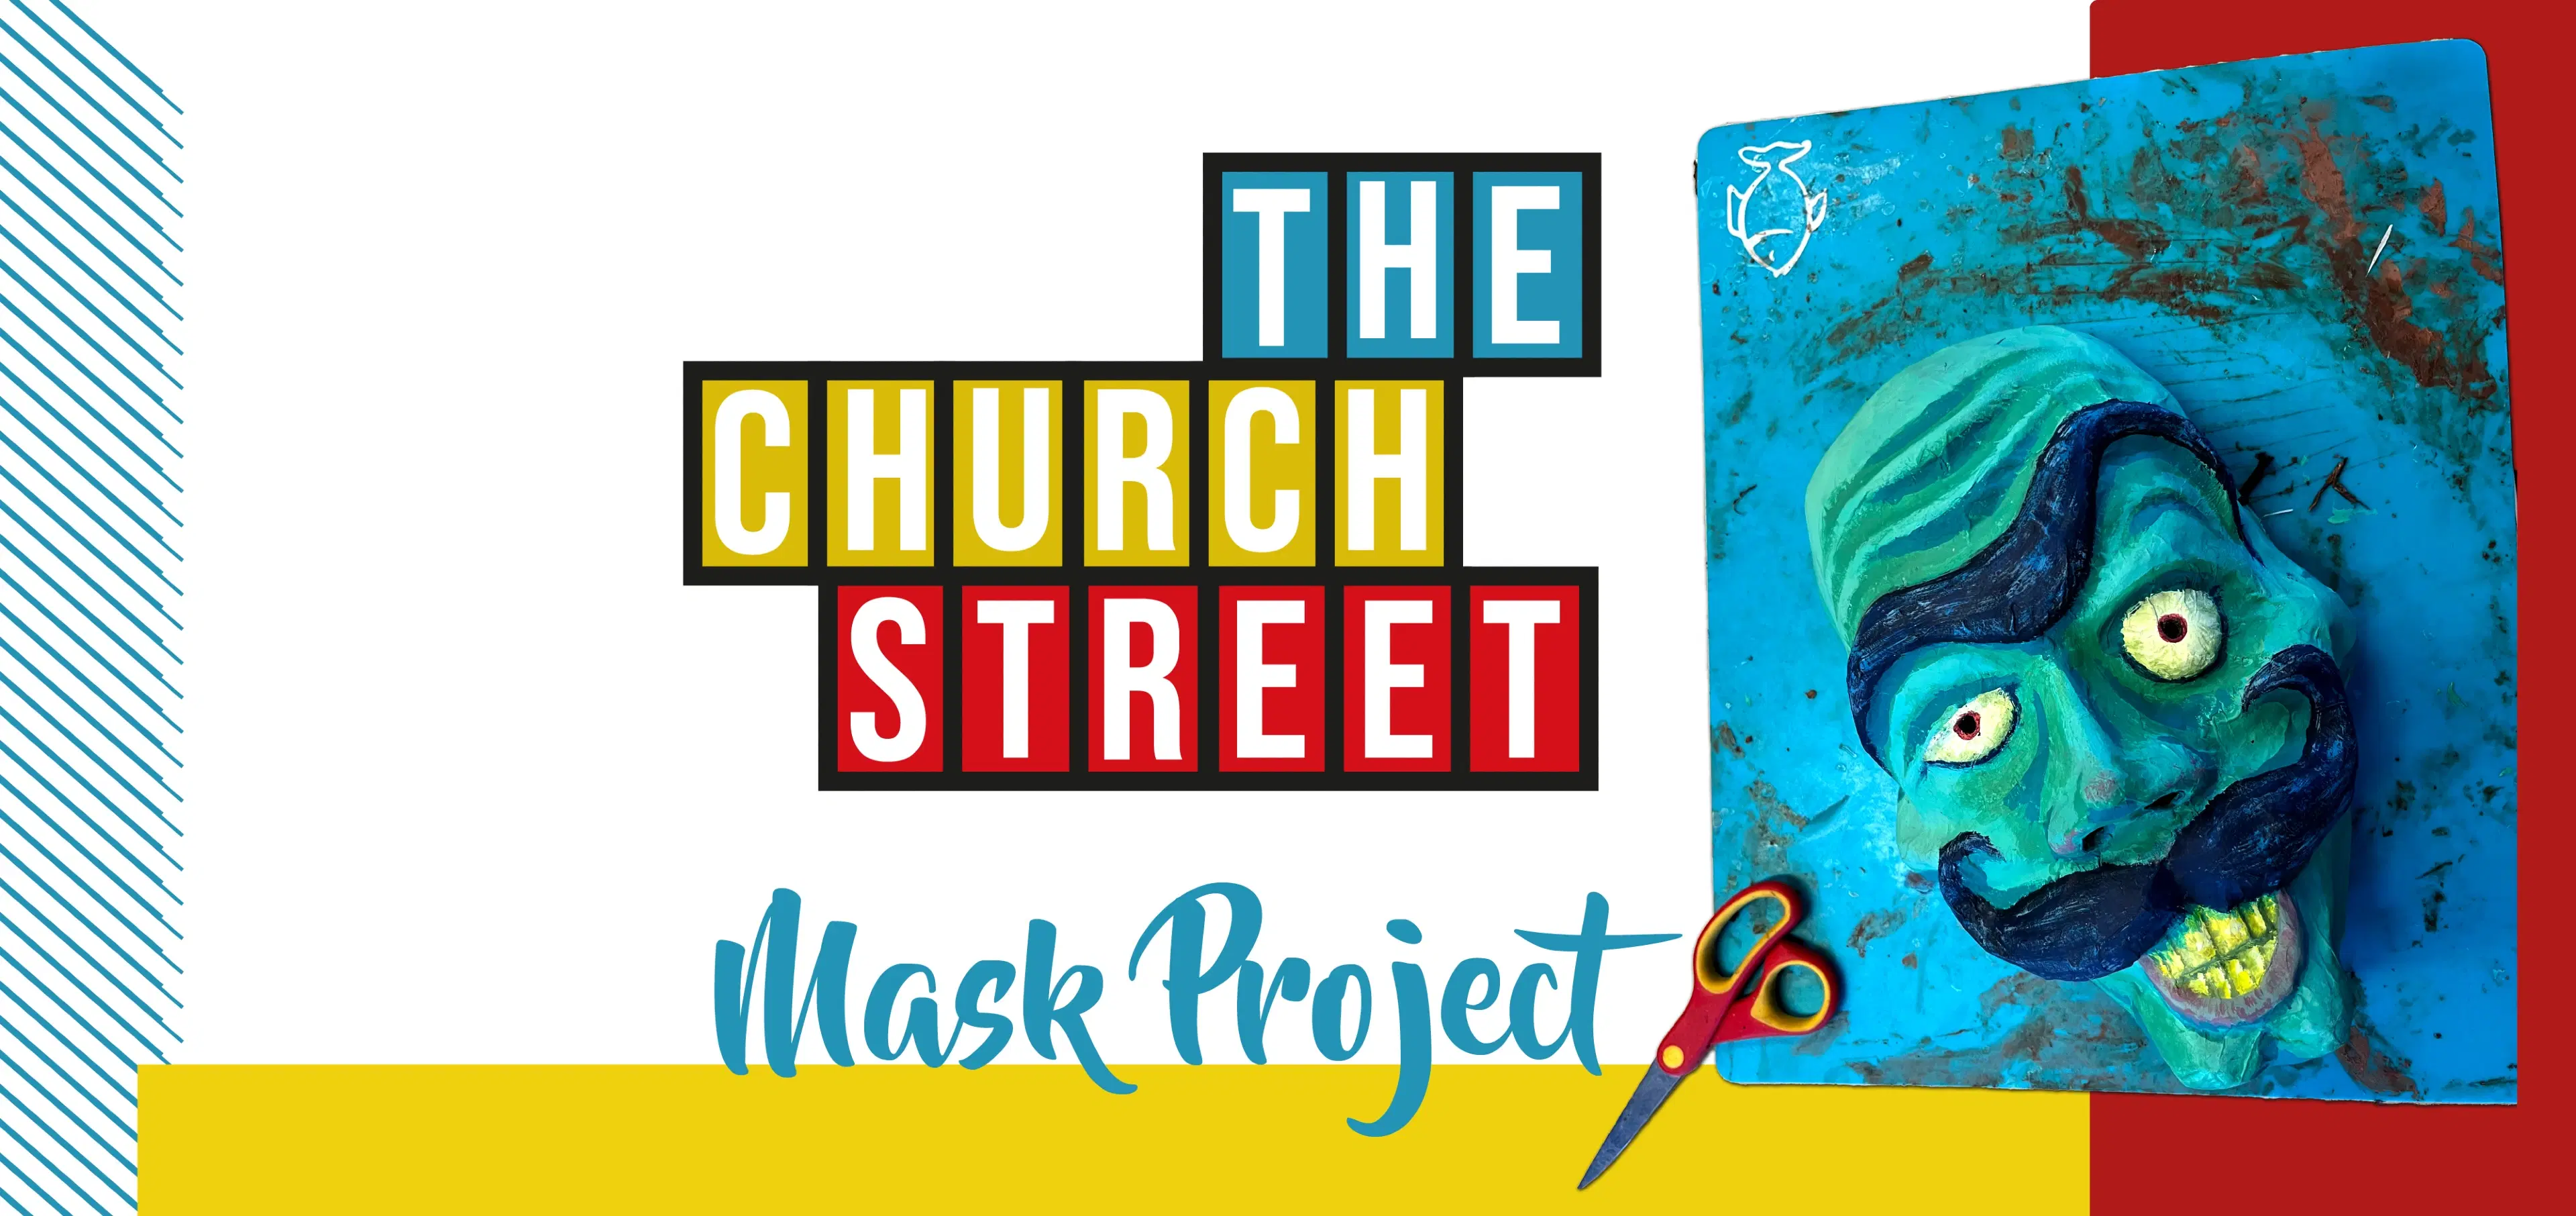 Vibrant and artistic: the church street mask project banner showcasing a colorful hand-painted mask.